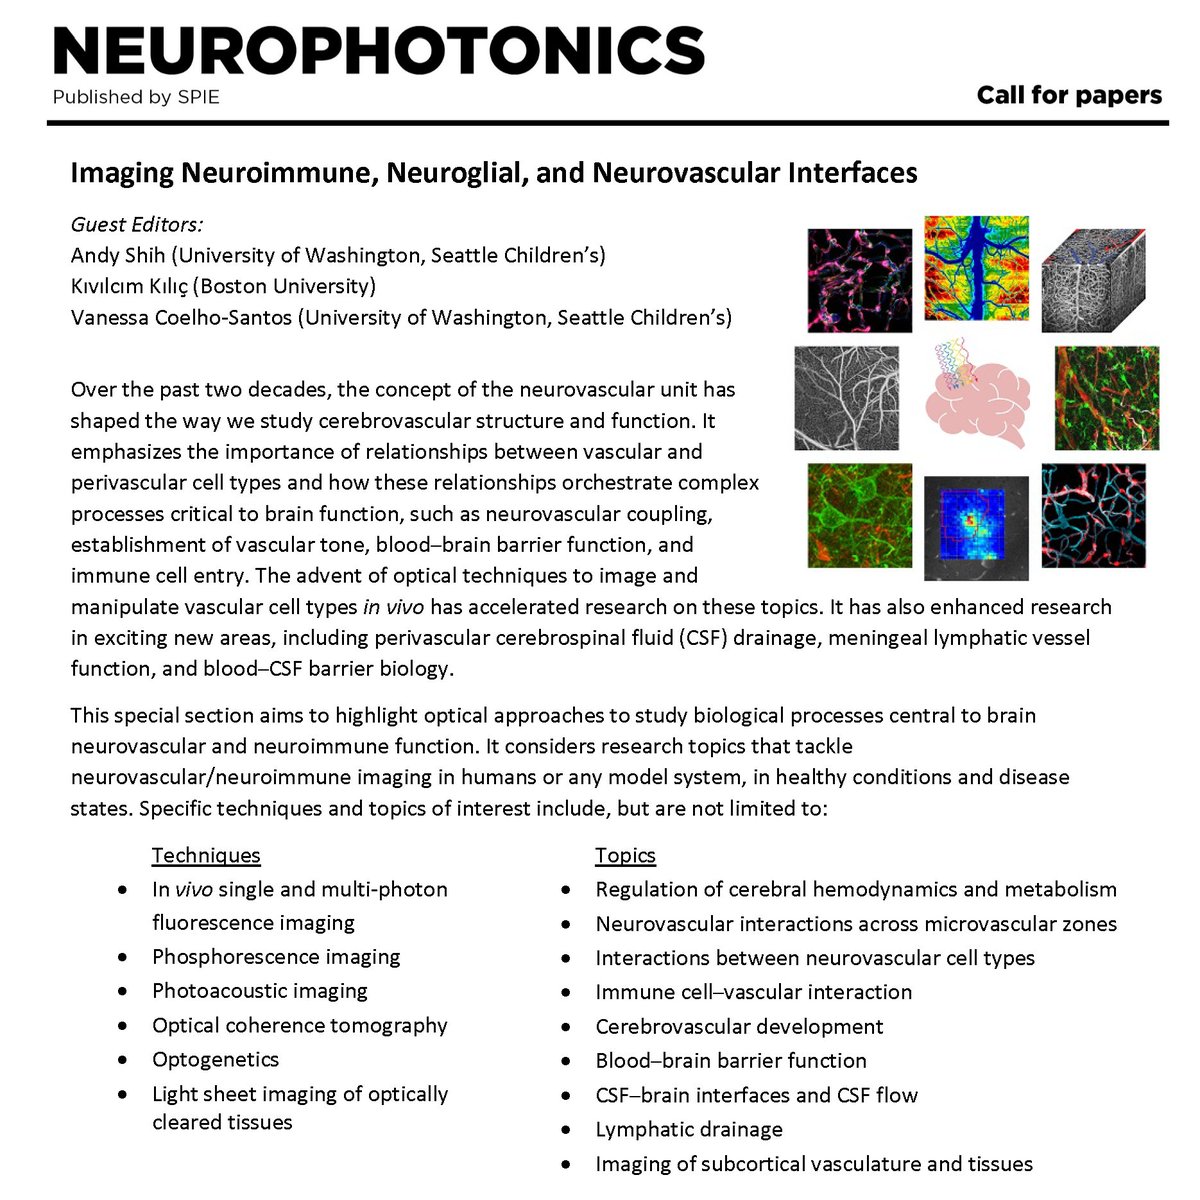 We are guest editing a special issue of #Neurophotonics on #OpticalImaging of #Neuroimmune, #Neuroglial & #Neurovascular interfaces.

Publish reviews, primers, protocols, and tutorials for FREE. Please spread the word! @SPIEtweets 

More info: spiedigitallibrary.org/journals/neuro…